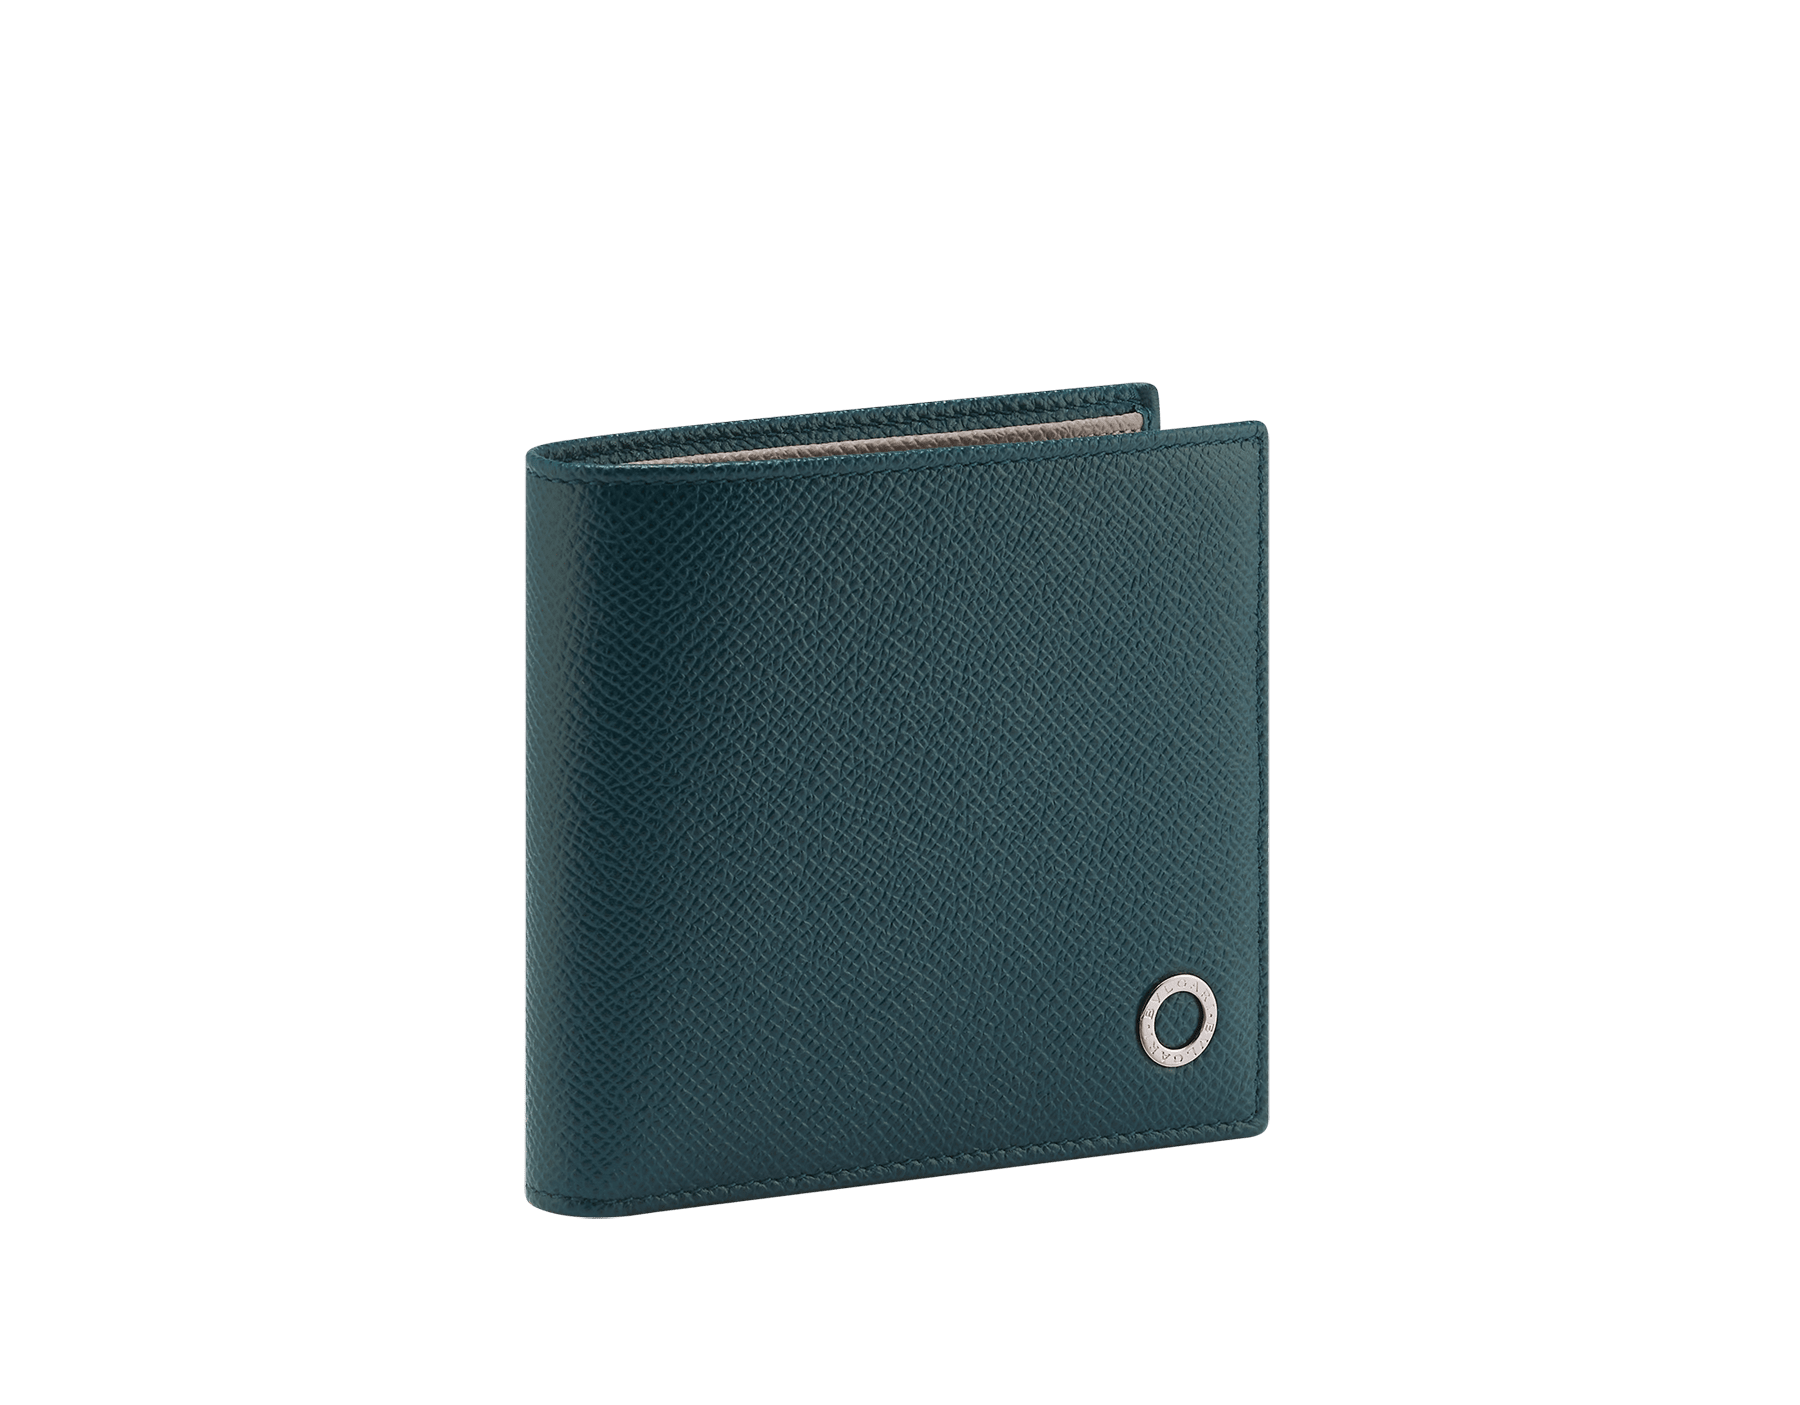 BULGARI BULGARI Man compact wallet in soft black full-grain calf leather with watercolour opal light blue nappa leather interior. Iconic palladium-plated brass embellishment with watercolour opal light blue enamel, and folded closure. BBM-WLT-ITAL-sgcla image 1